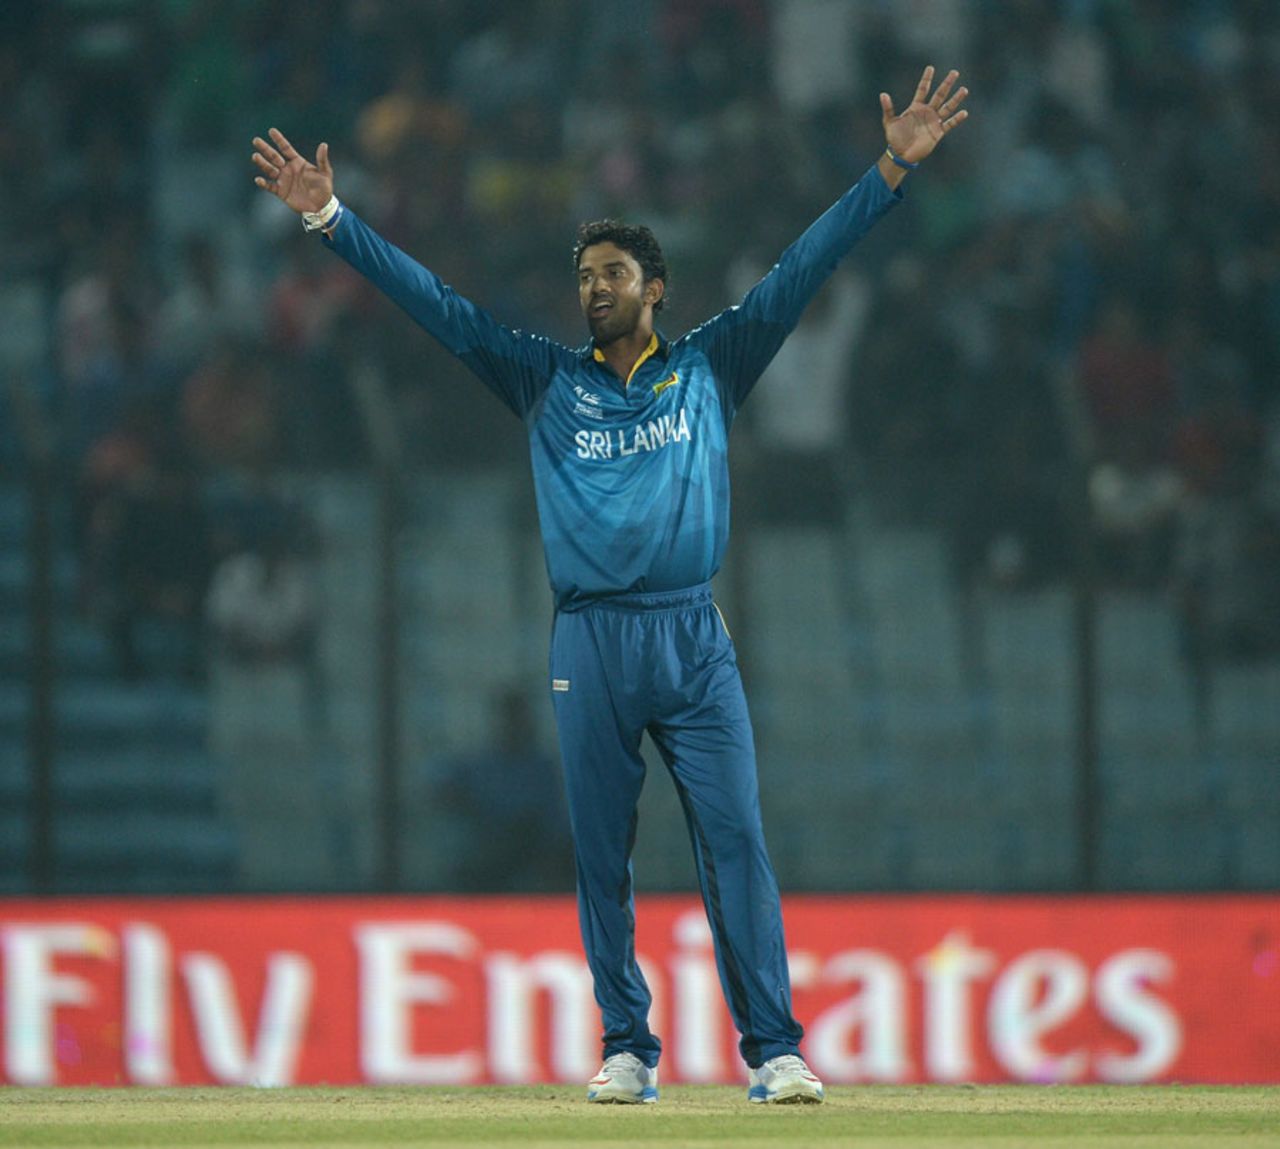 Sachithra Senanayake picked up two wickets, South Africa v Sri Lanka, World T20, Group 1, Chittagong, March 22, 2014 